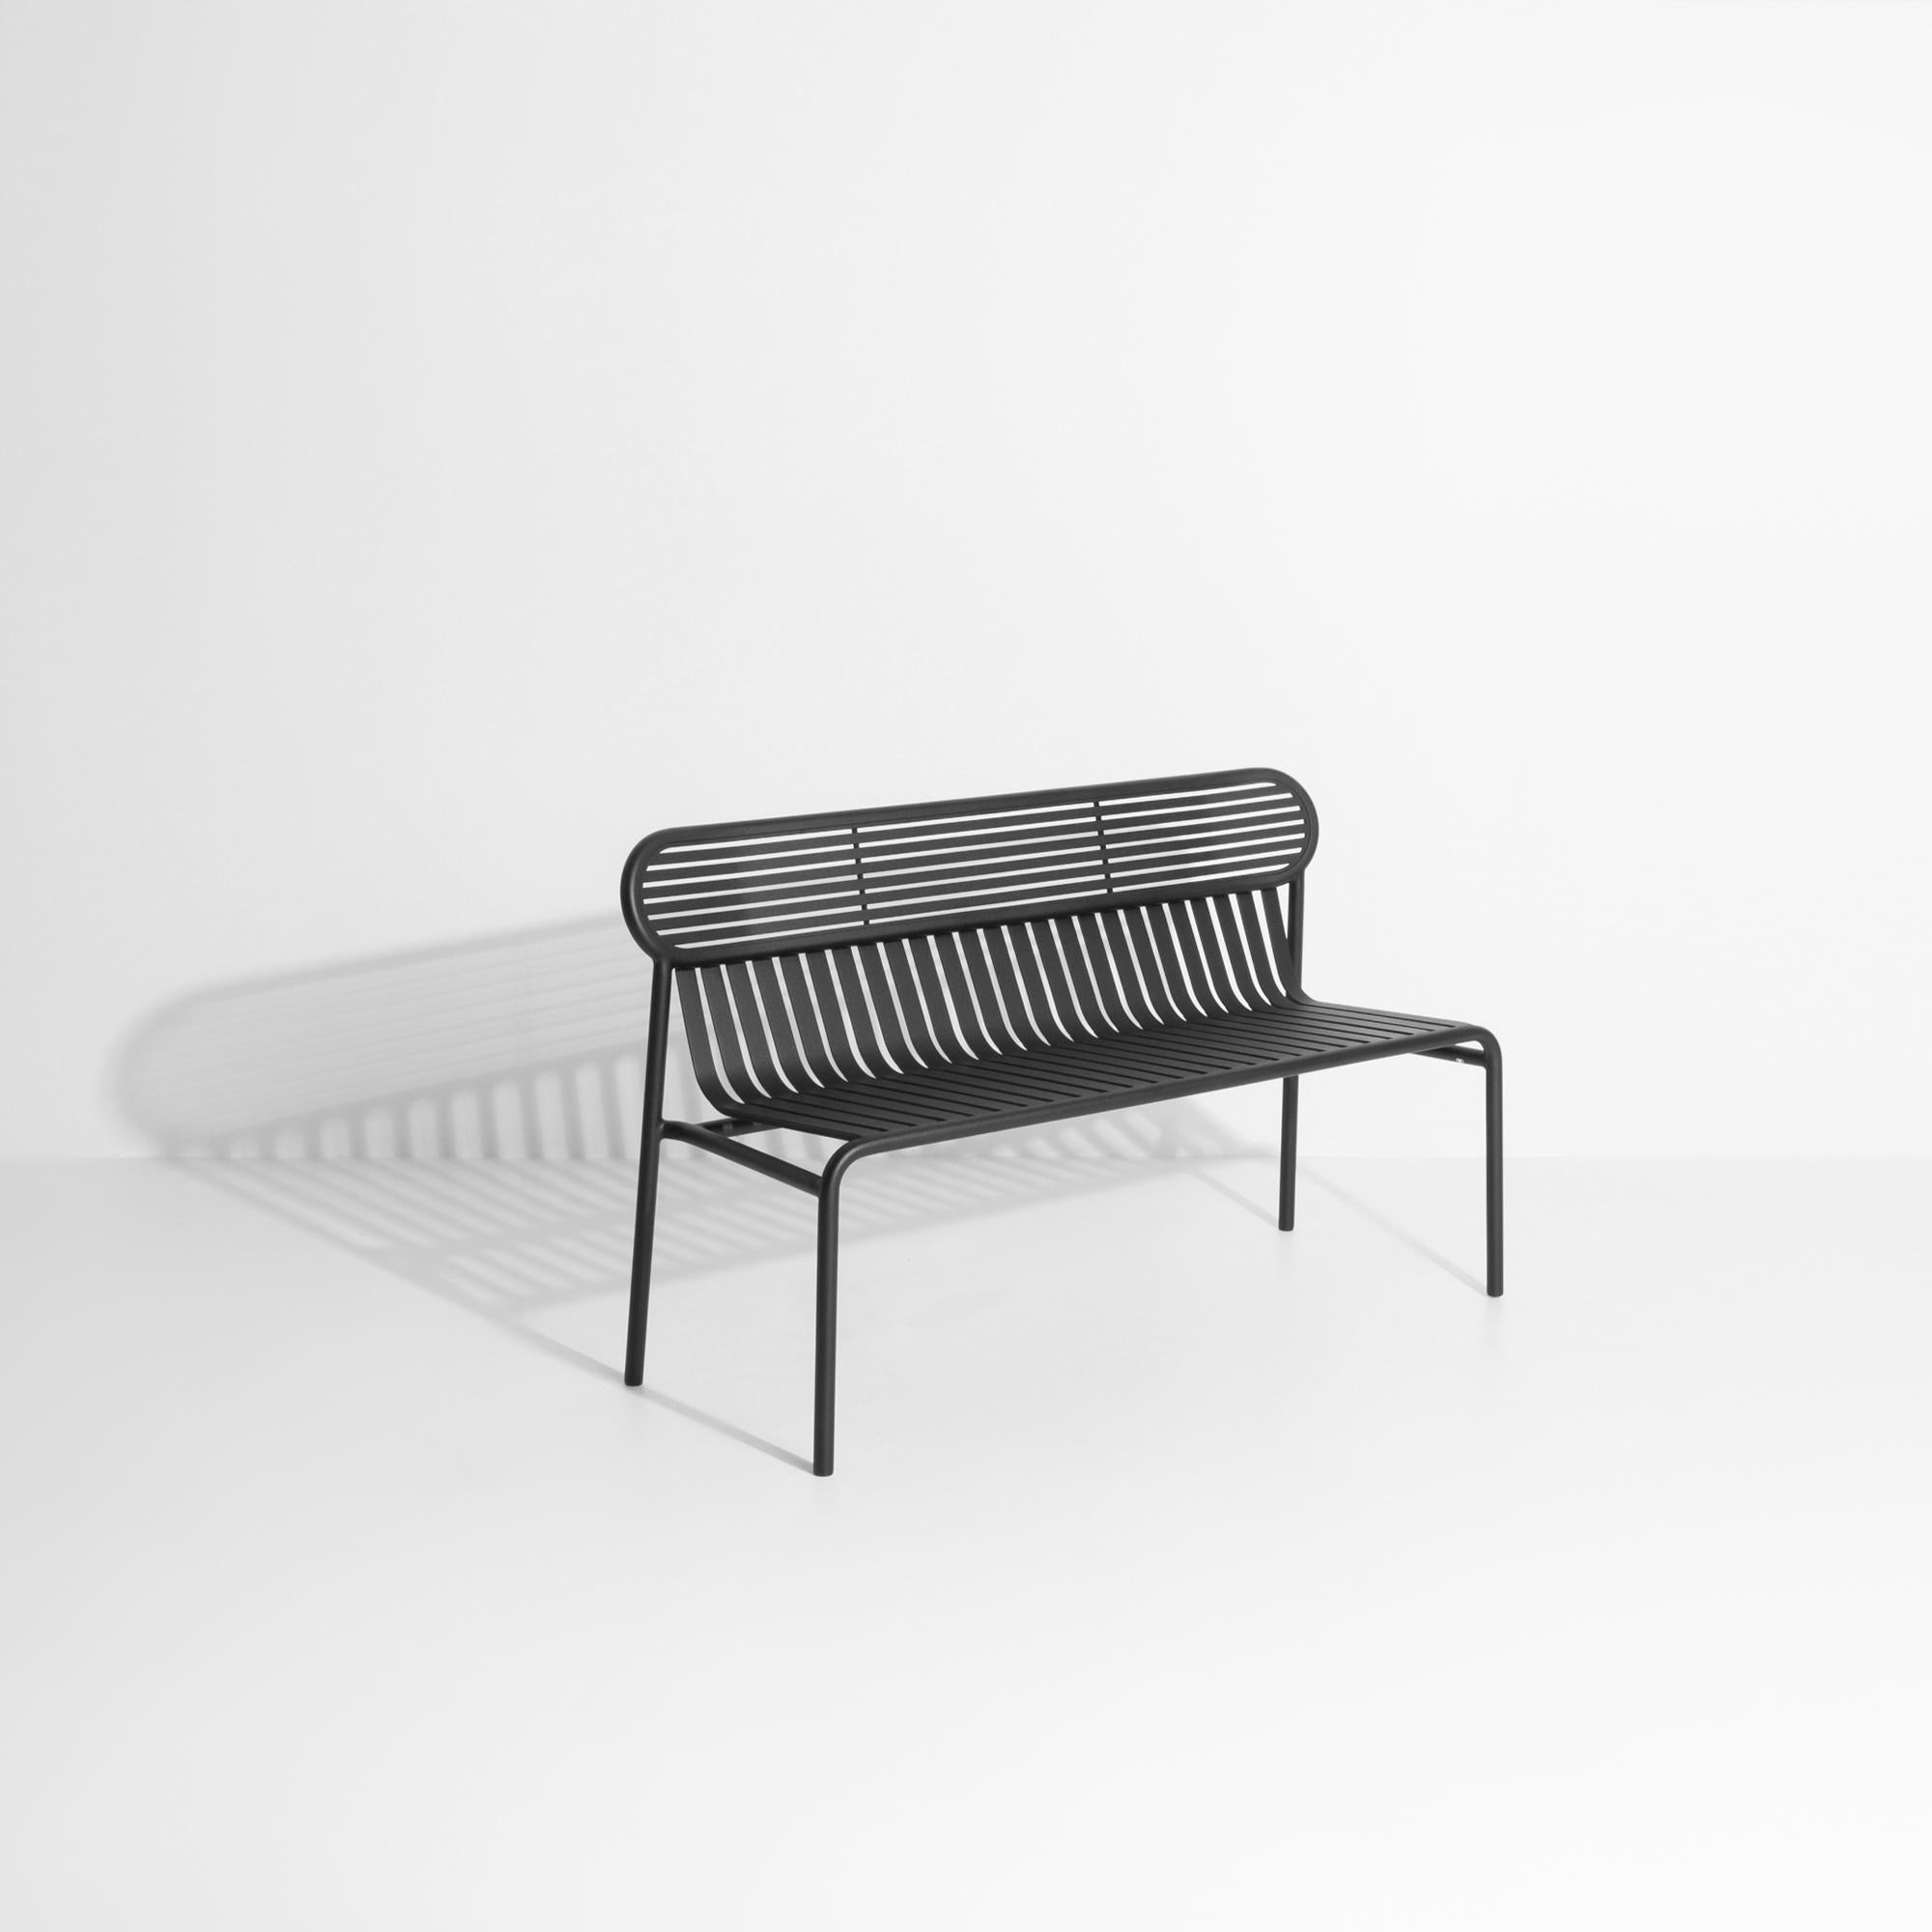 Contemporary Petite Friture Week-End Bench in Black Aluminium by Studio BrichetZiegler For Sale